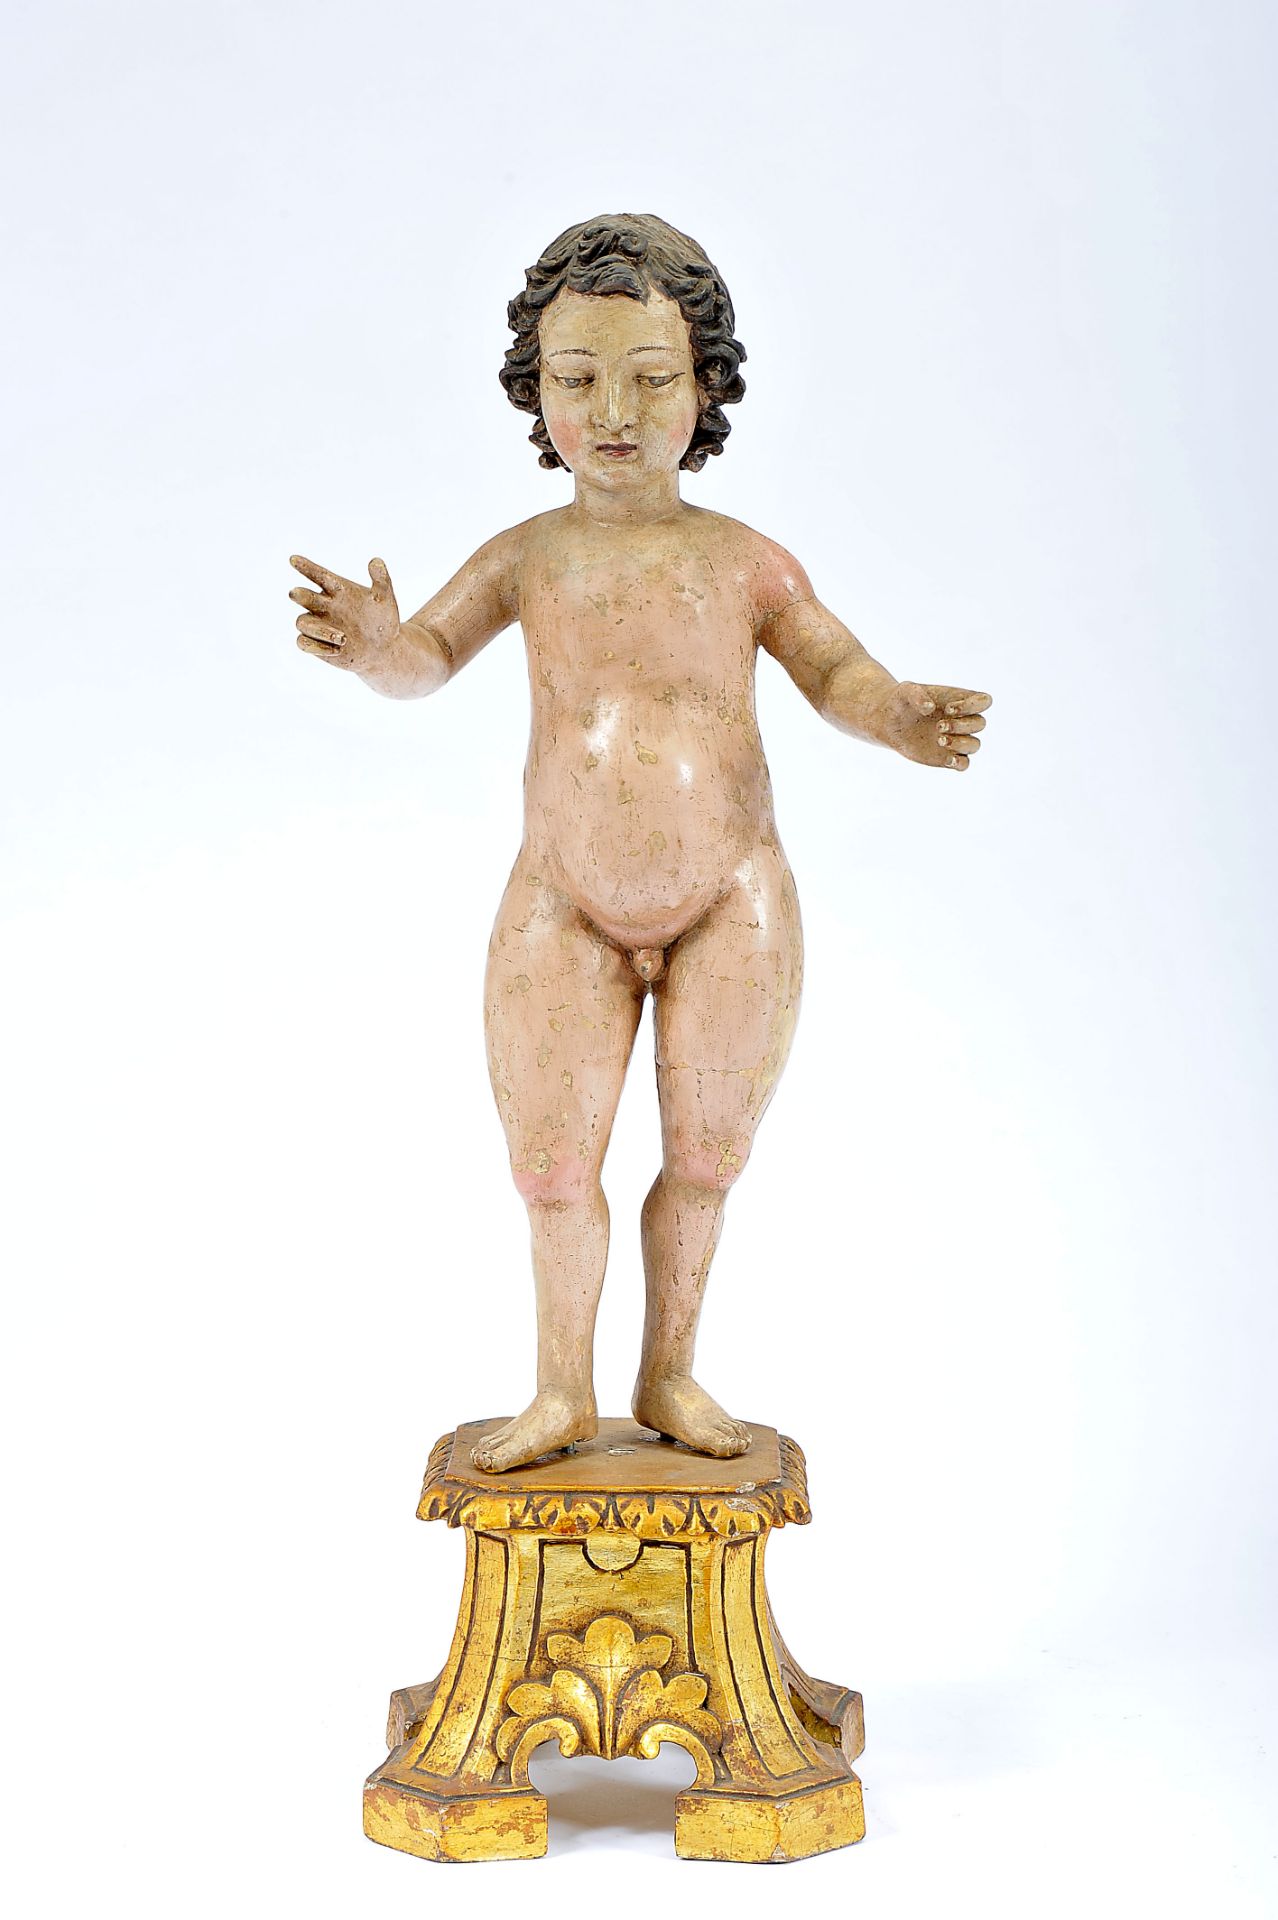 The Child Jesus, Malines, polychrome wooden sculpture, Flemish, 16th C., restoration and faults on